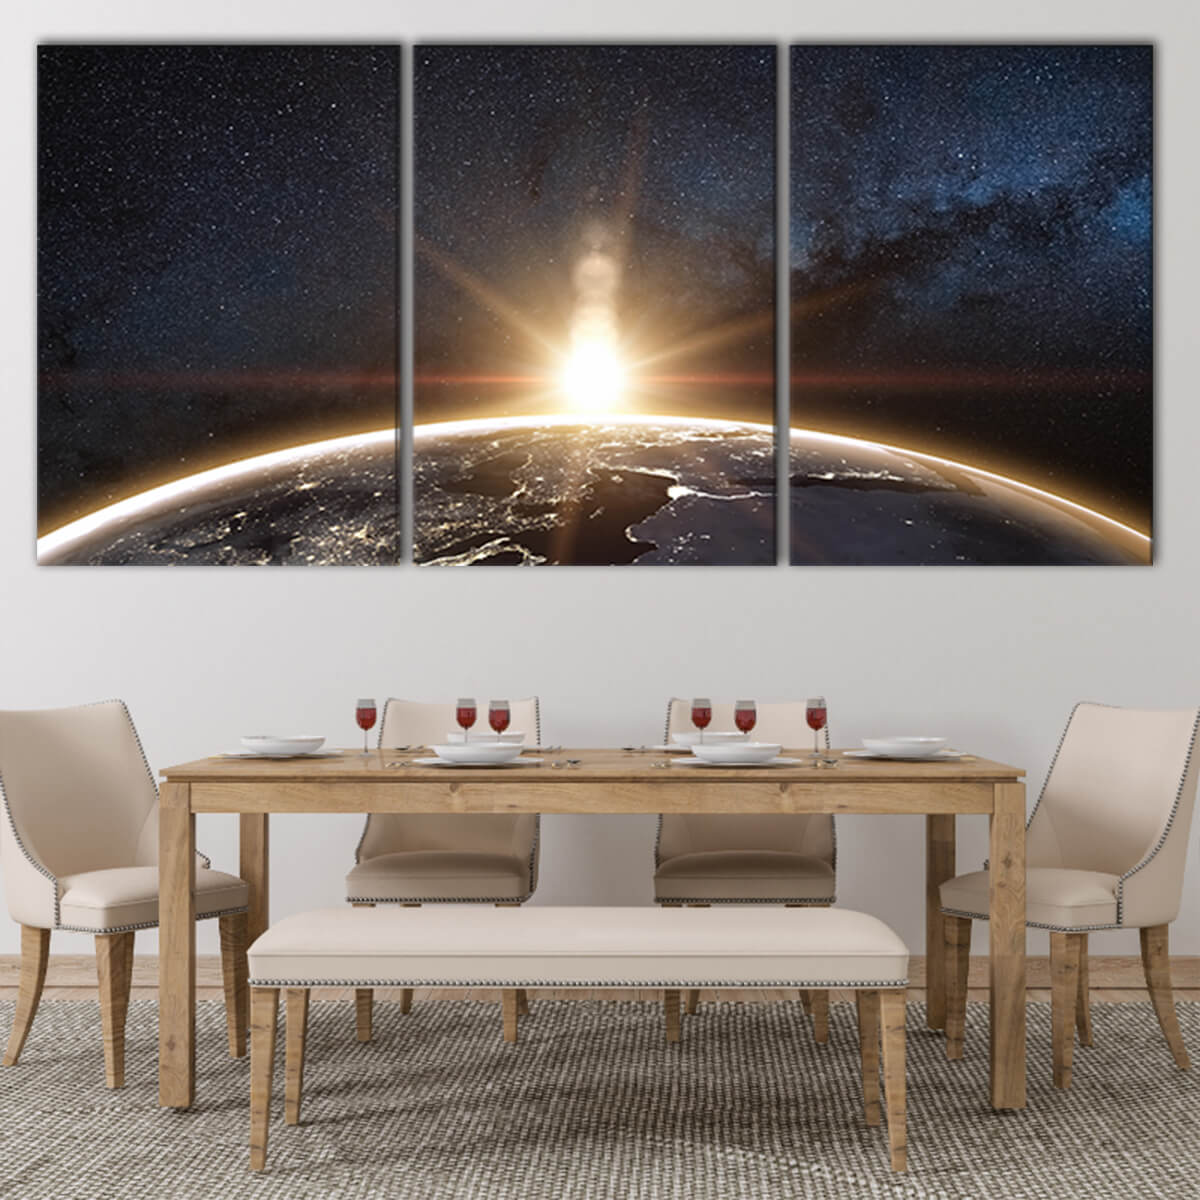 Earth from space Canvas Wall Art Set